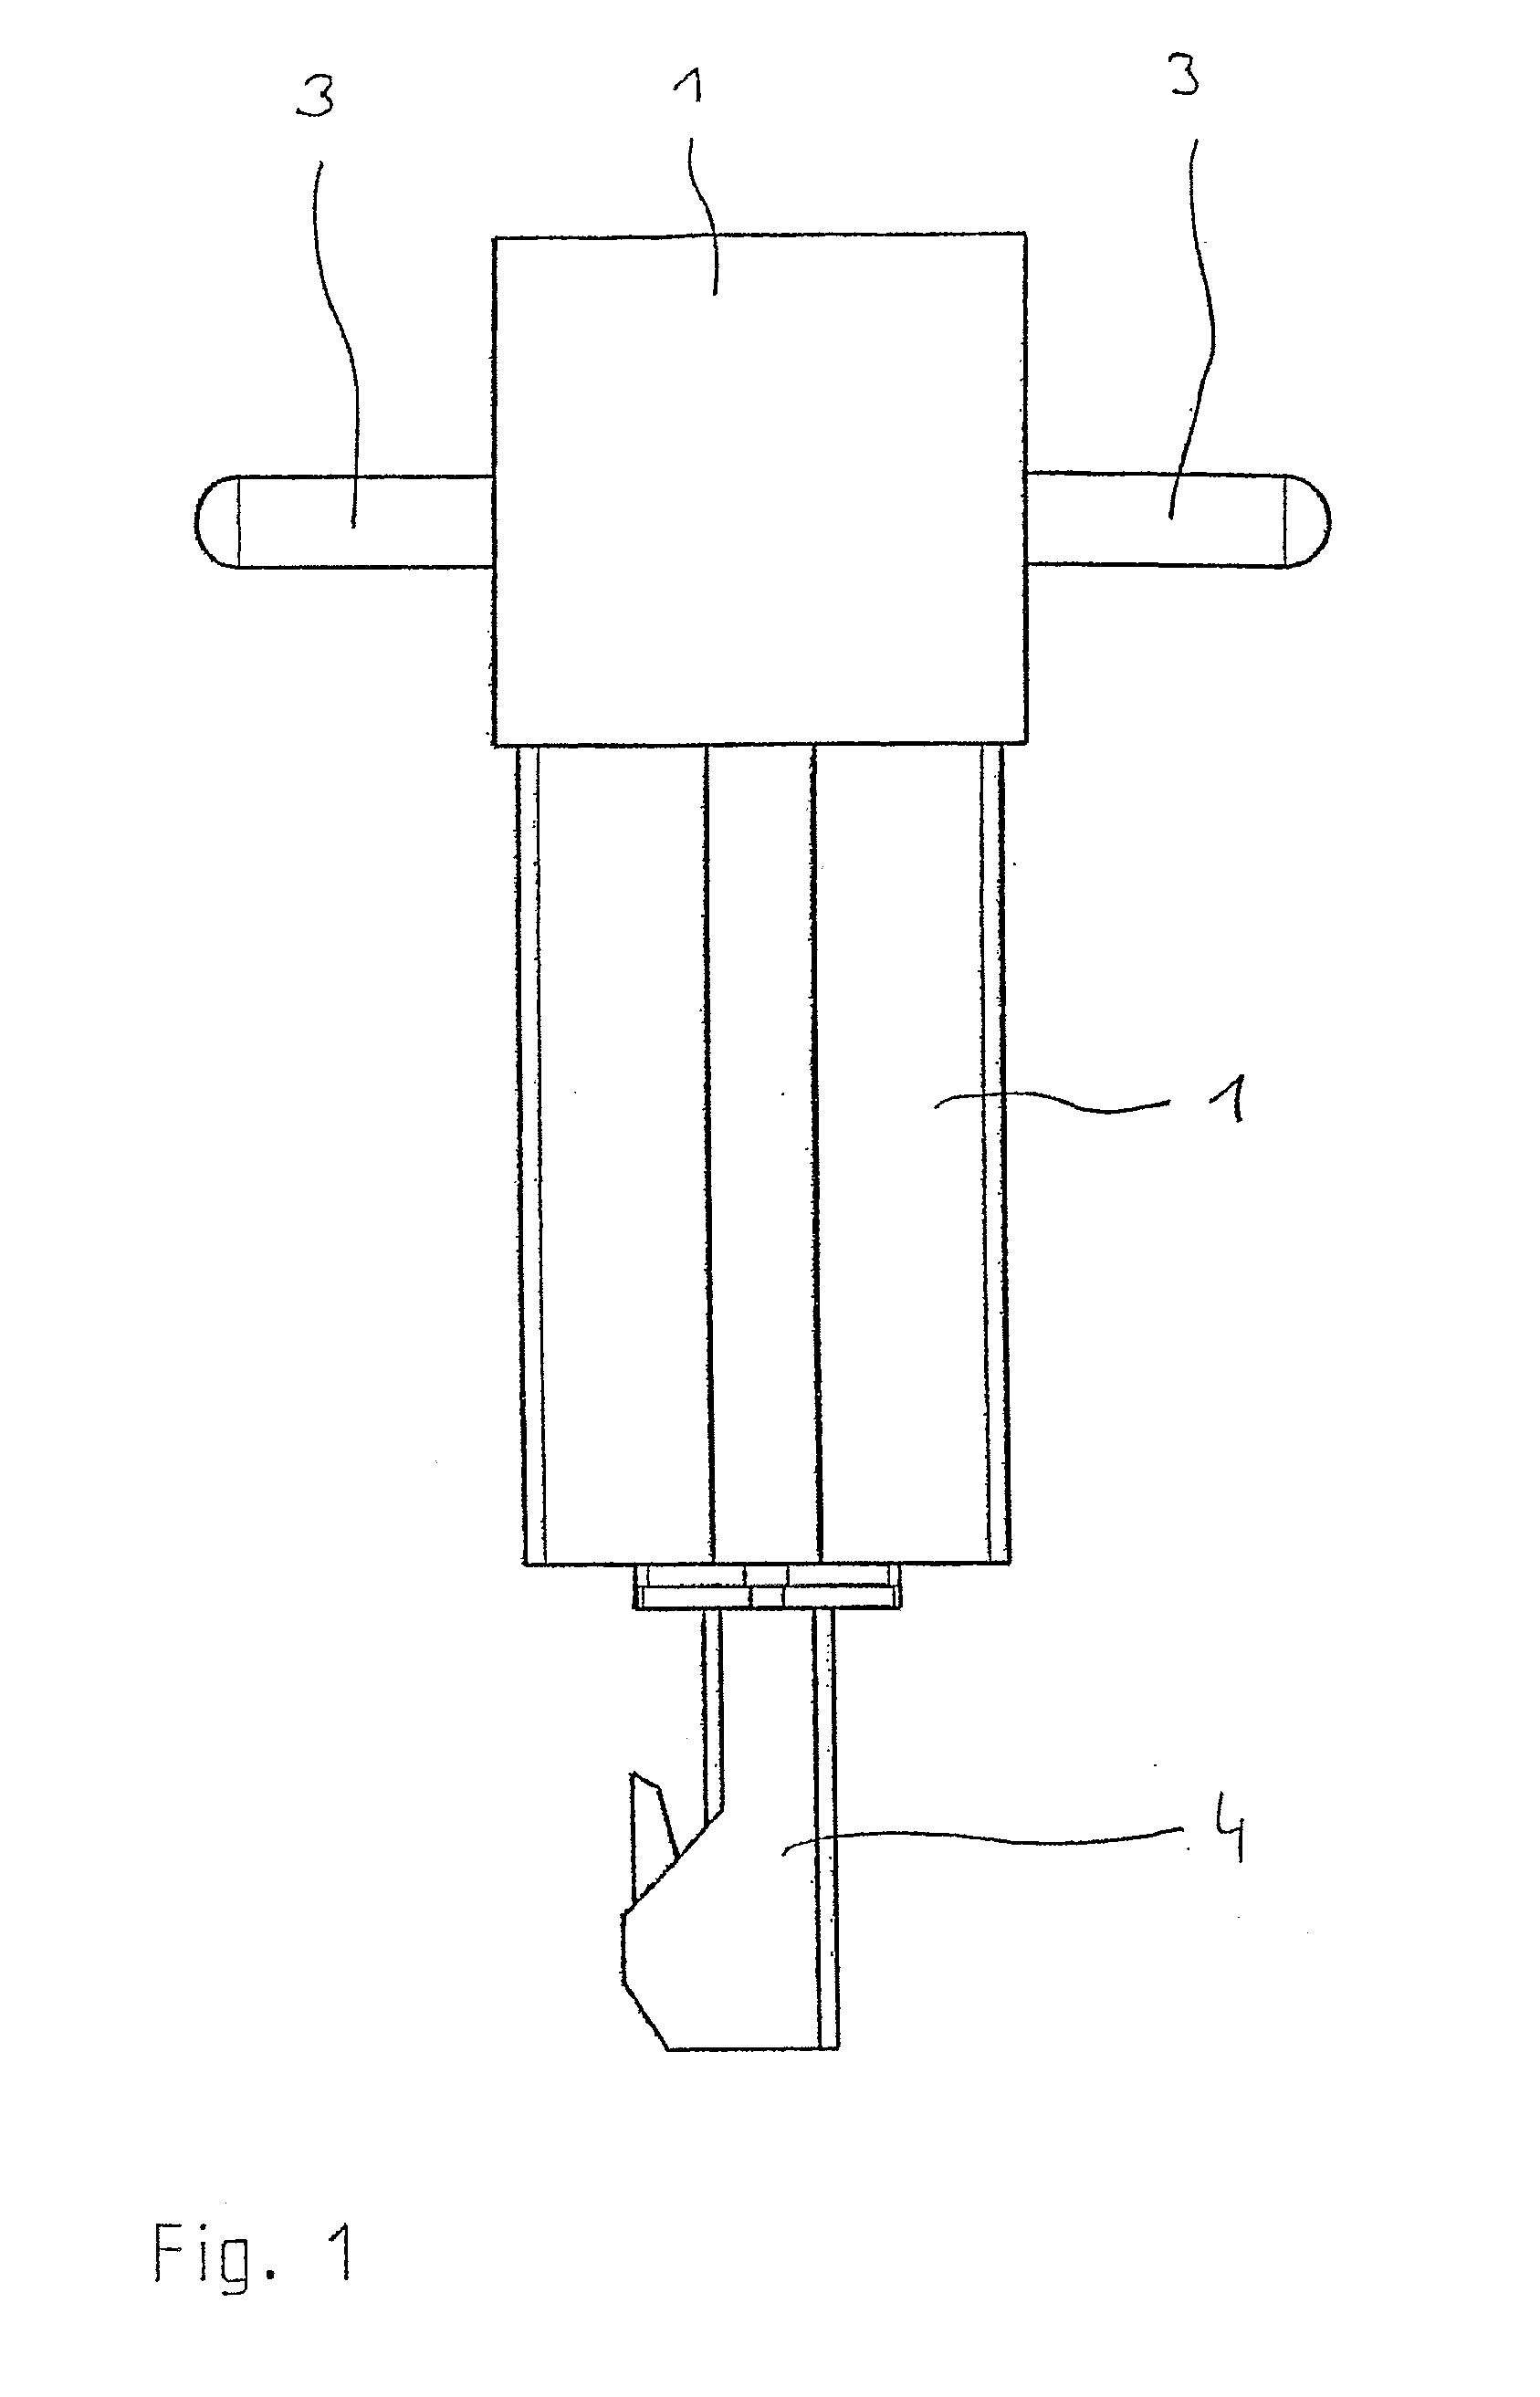 Percussion Hammer and/or Drill Hammer Comprising a Handle Which Can be Guided in a Linear Manner